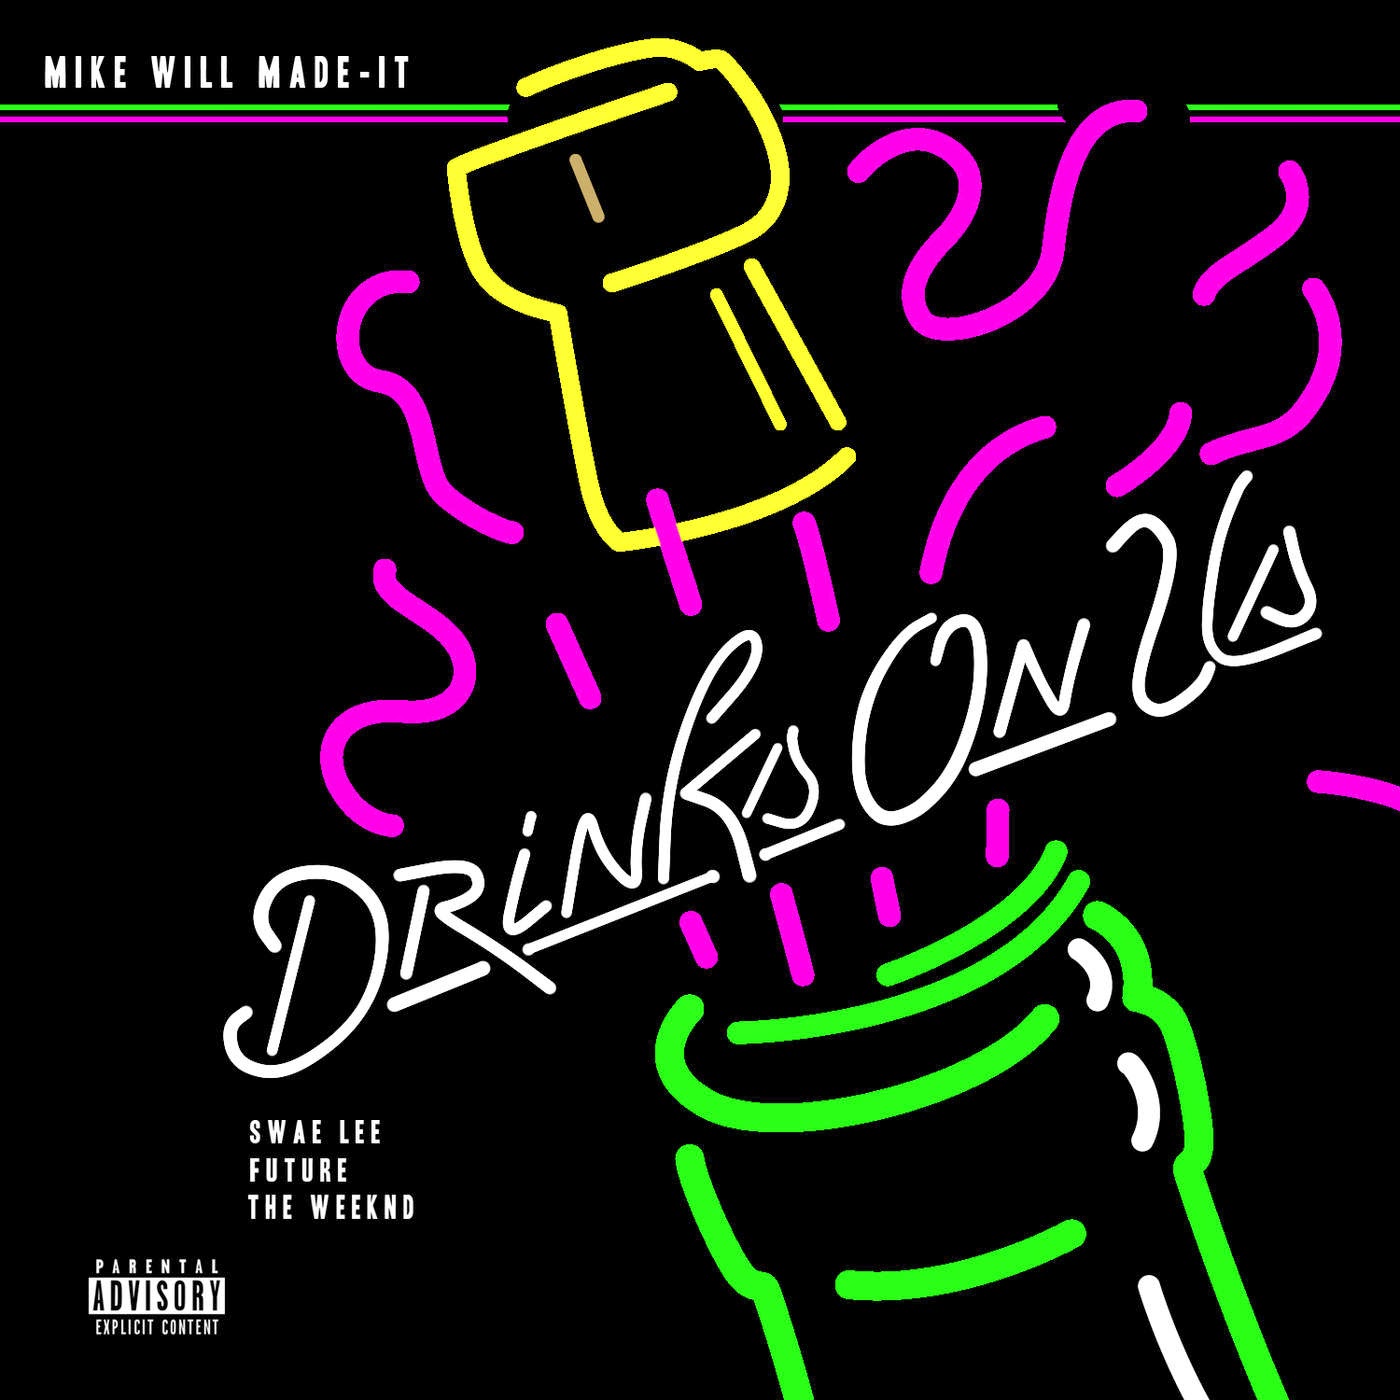 Mike WiLL Made It – 'Drinks On Us' (Feat. Swae Lee, Future & The Weeknd) (New ...1400 x 1400